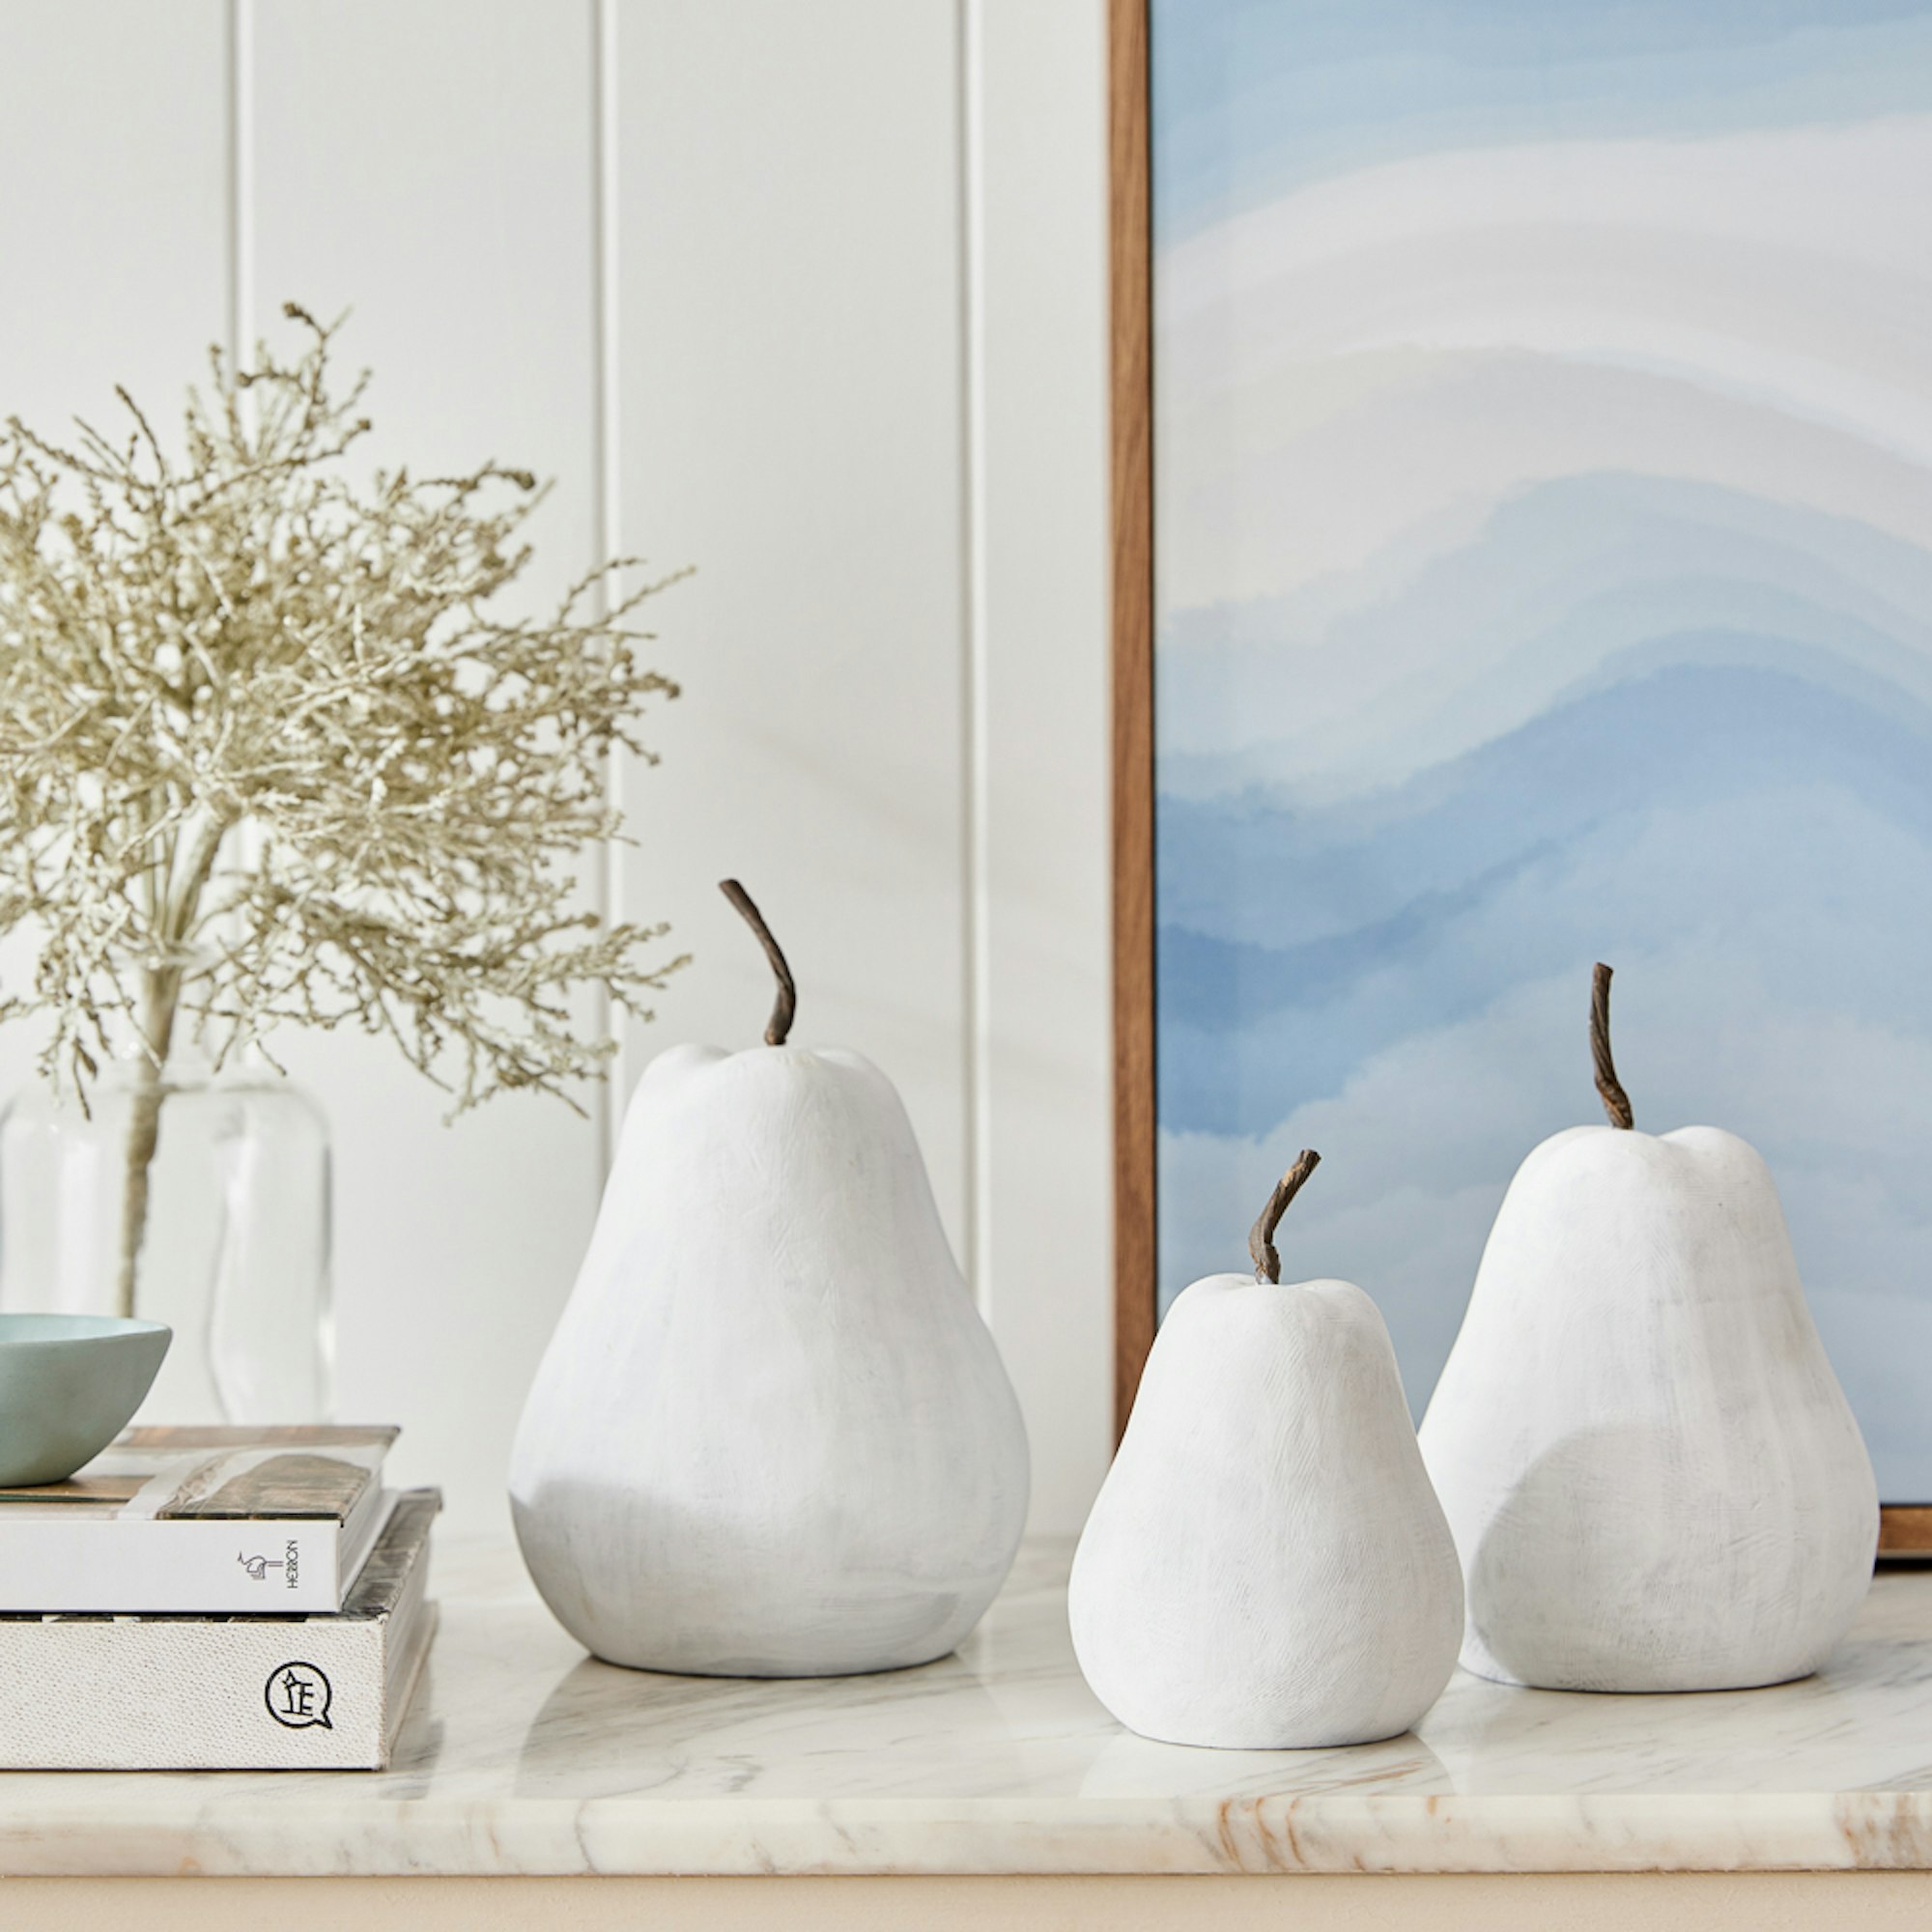 Home with Deborah Hutton SS23 collection. Set of 3 Cement Pears on hallway table.